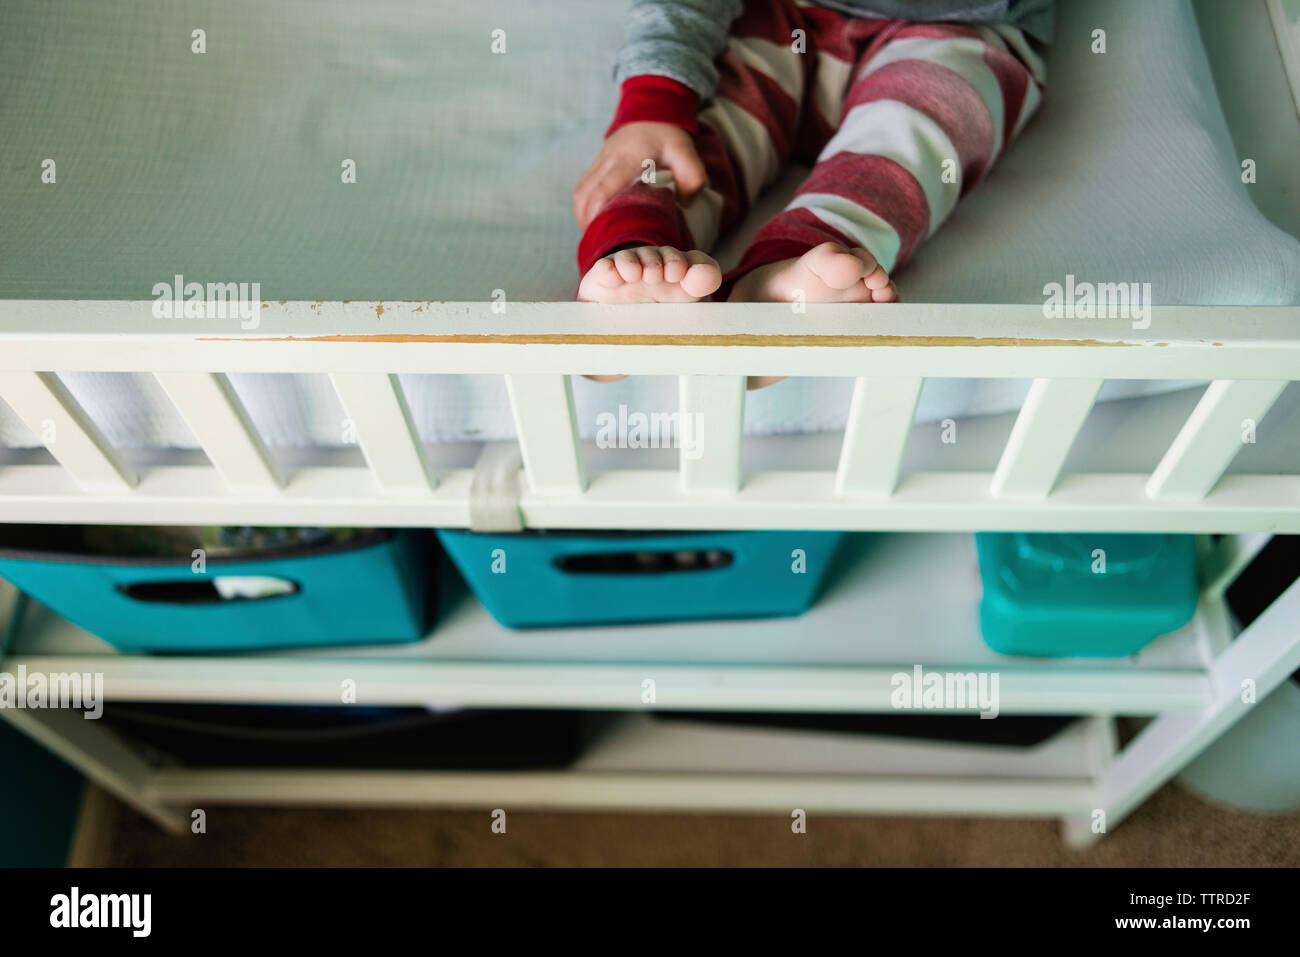 Low section of boy sitting on bunkbed Stock Photo